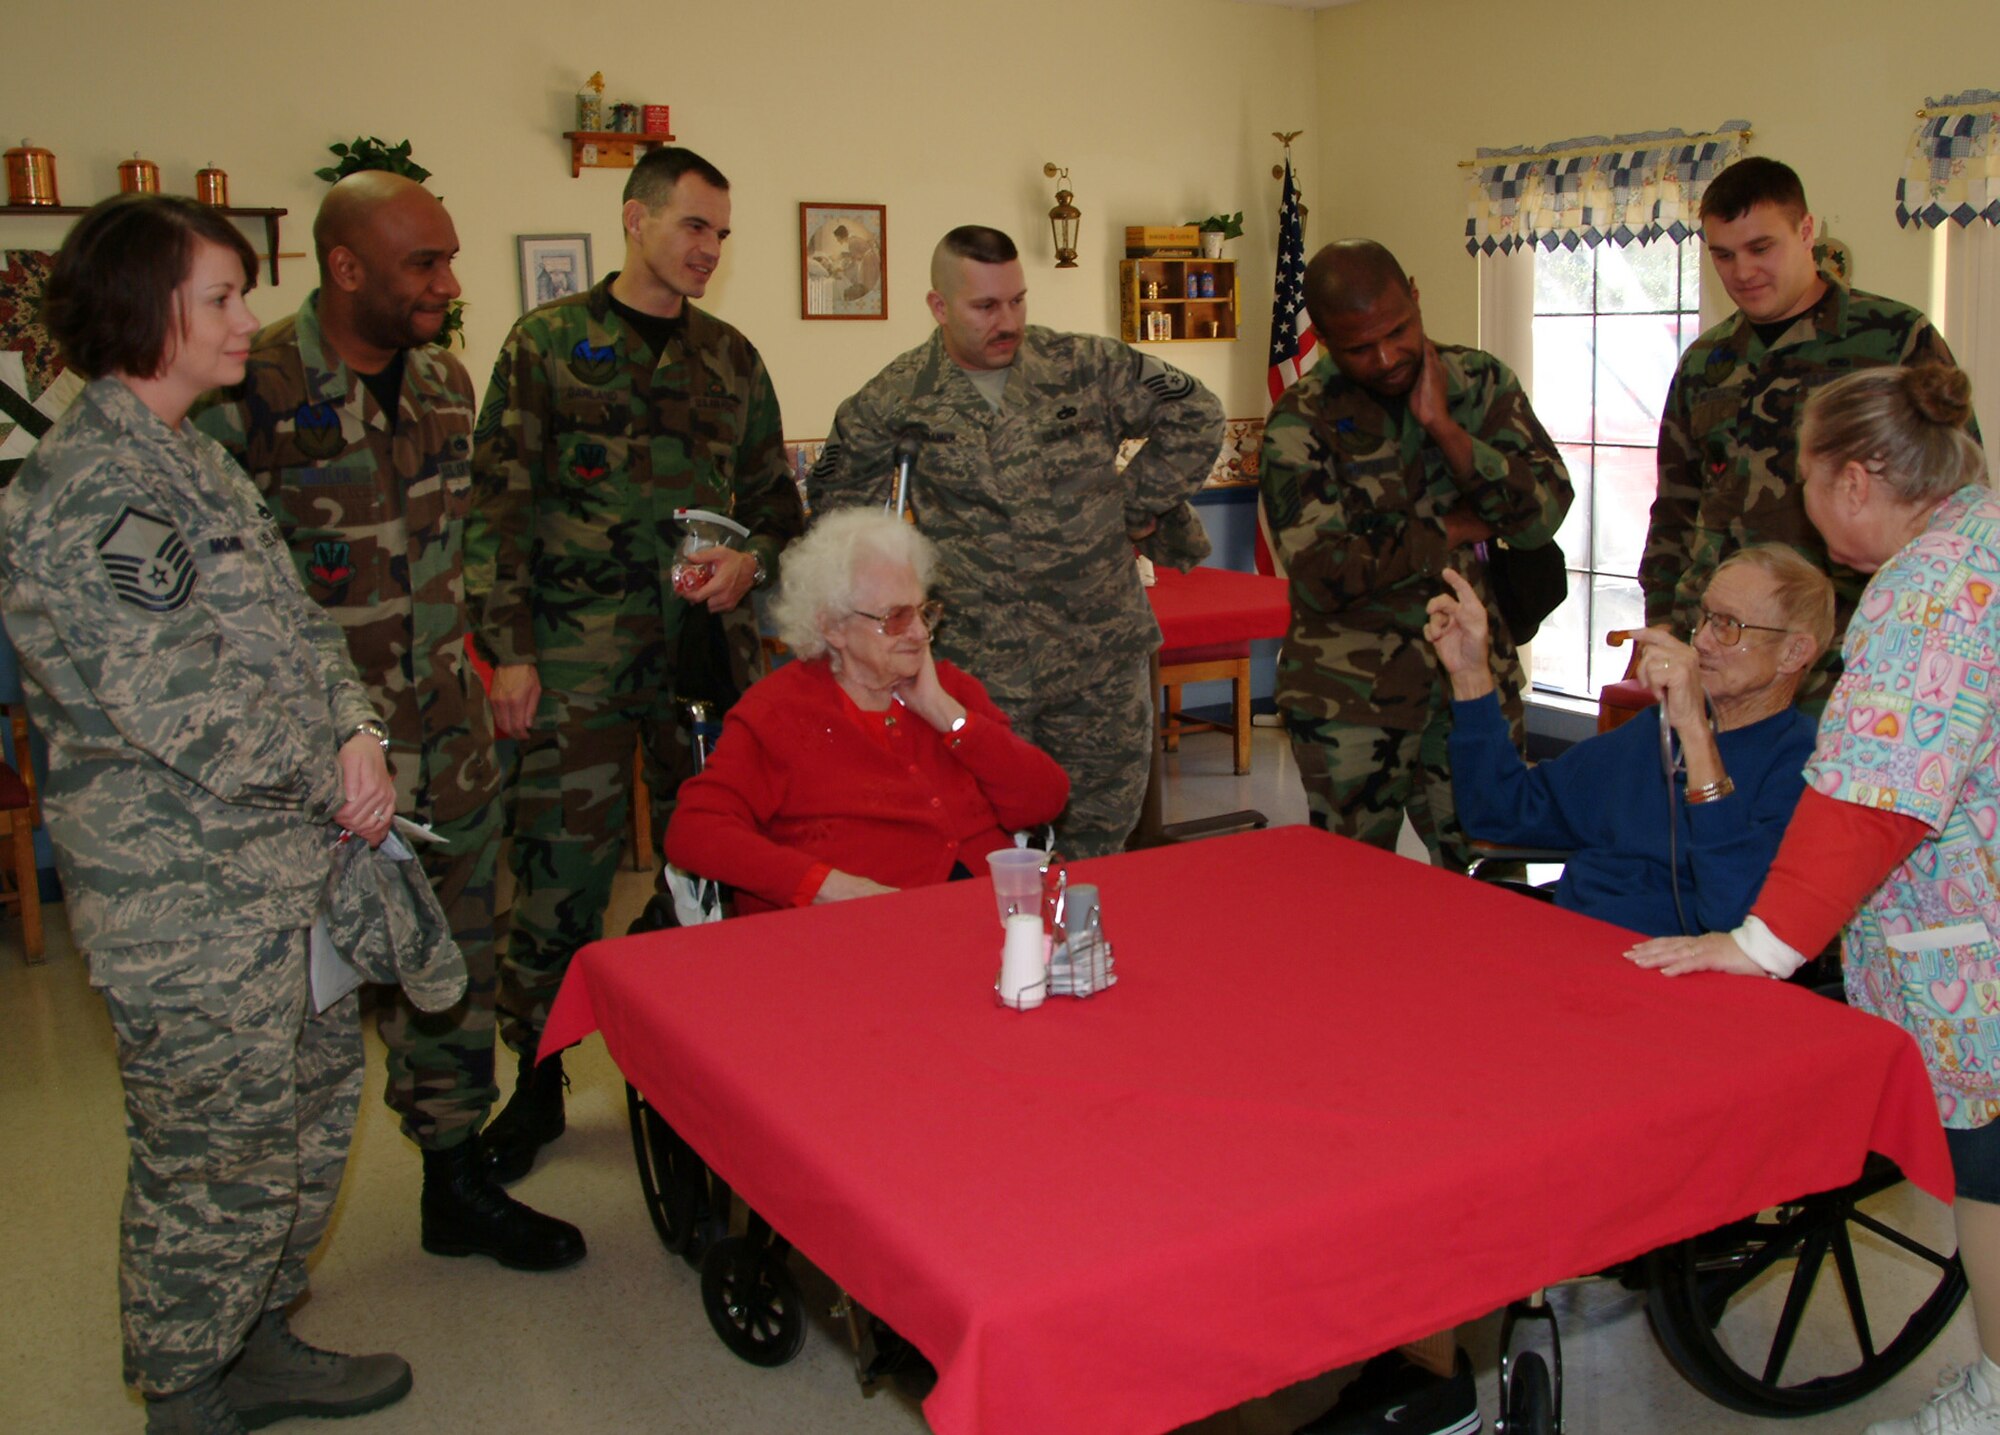 Members of the 53d Electronic Warfare Group visit with veteran Homer Guernsey and his wife Feb. 14 at the Silvercrest Rehabilitation Center in Crestview Fla.  More than 50 active duty 53d Wing members presented vets in nursing homes around the local area with cards and candy on Valentine's Day.  U.S. Air Force photo by Master Sgt. Andrew Leonhard.  